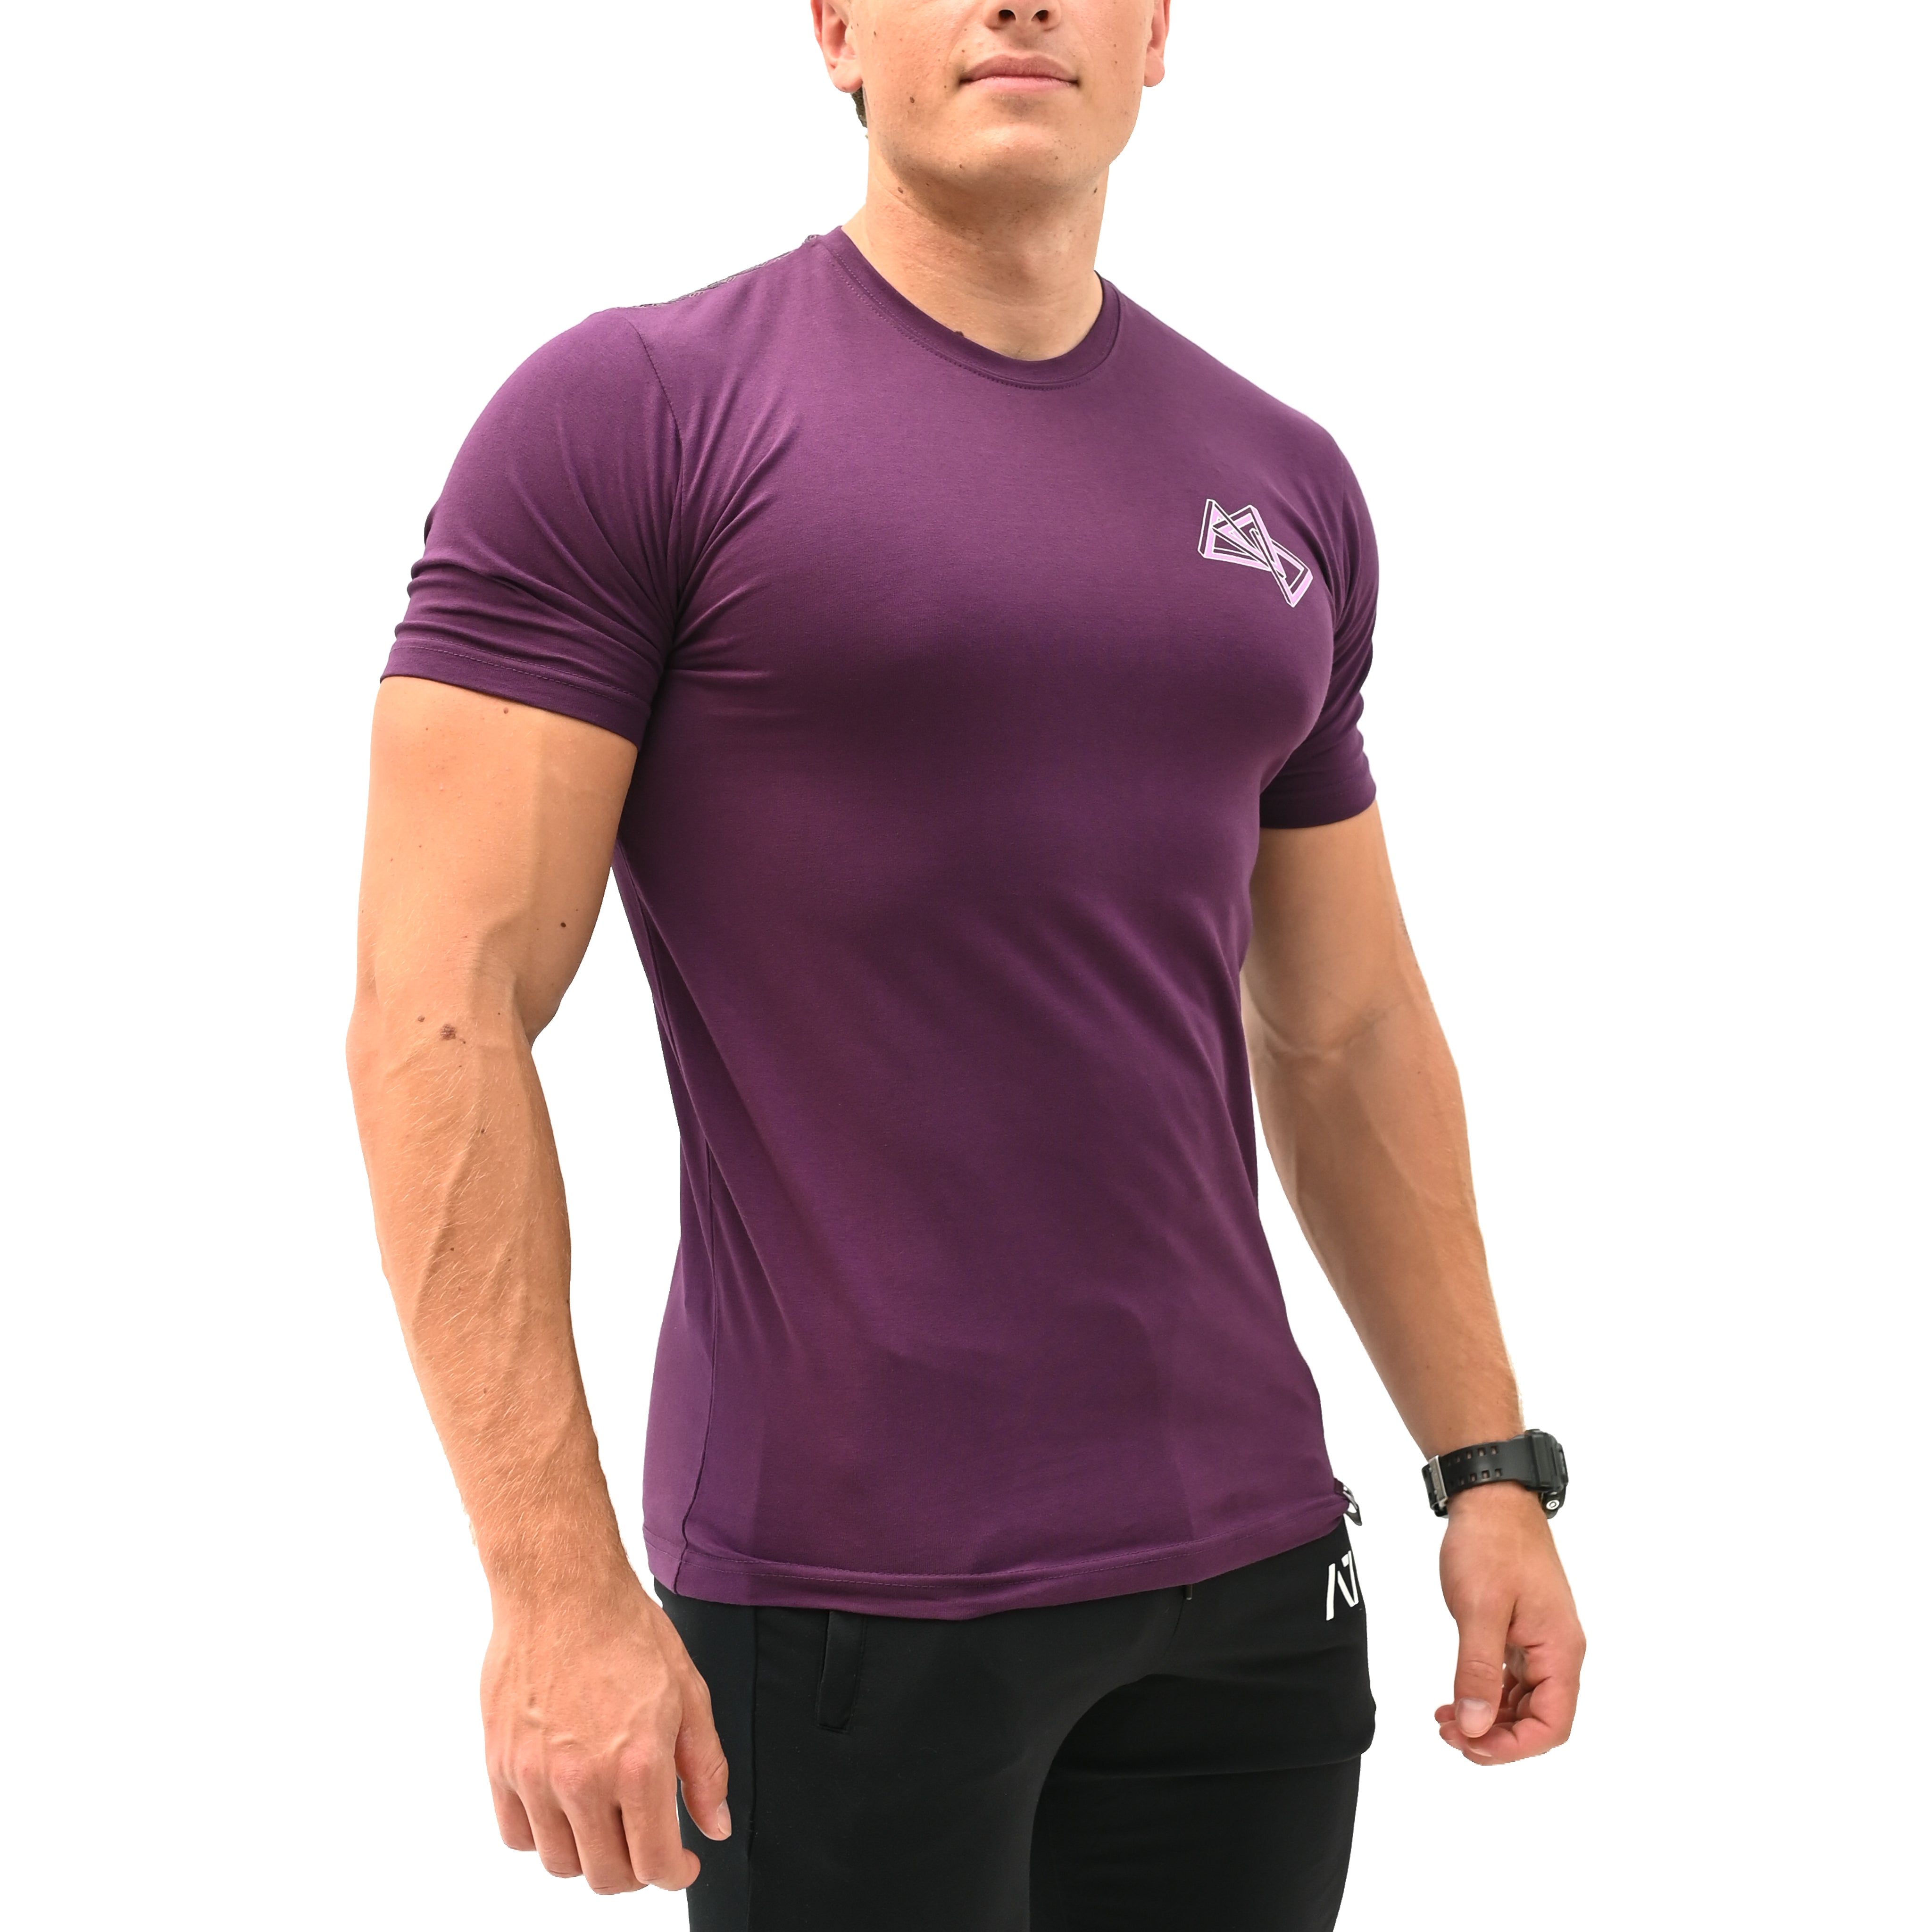 Delta Link Berry Bar Grip T-shirt, great as a squat shirt. Purchase Delta Link Berry Bar Grip Shirt from A7 UK. Purchase Delta Link Berry Bar Grip Shirt Europe from A7 Europe. No more chalk and no more sliding. Best Bar Grip T shirts, shipping to UK and Europe from A7 UK. Delta Link Berry Bar Grip Shirt includes. A7UK has the best Powerlifting apparel for all your workouts. Available in UK and Europe including France, Italy, Germany, the Netherlands, Sweden and Poland.